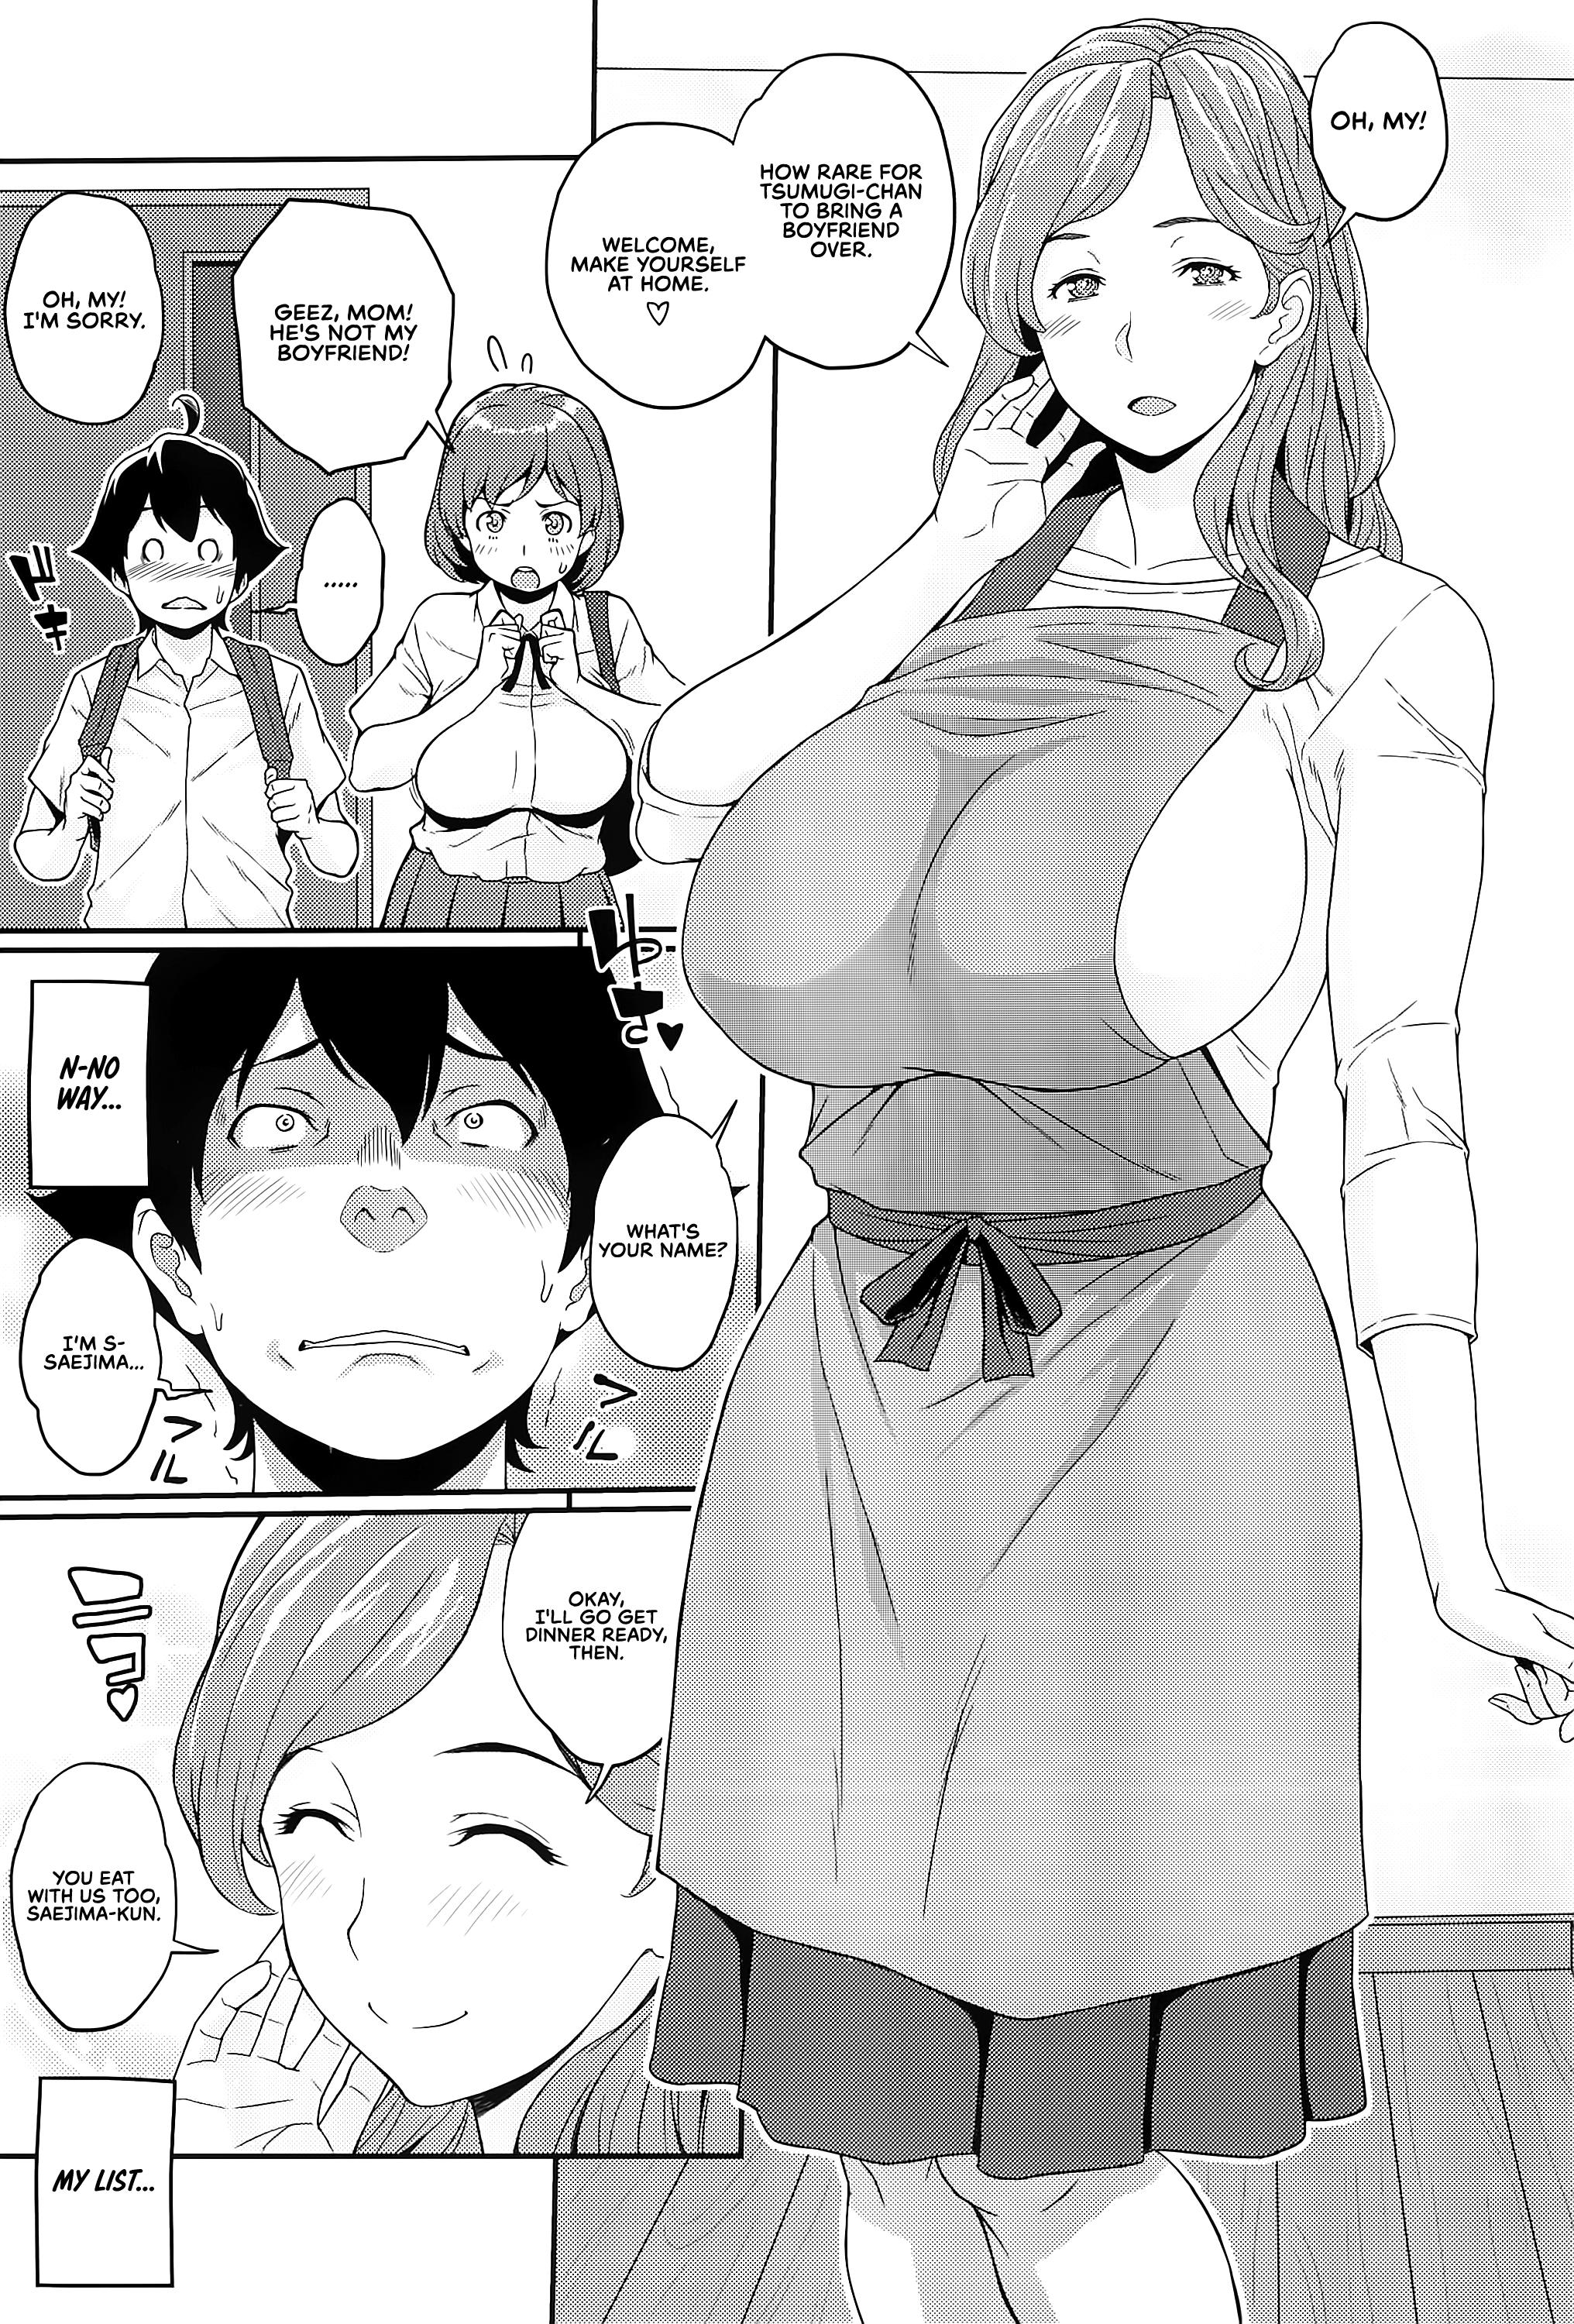 Page 30 | The Ability I Obtained - Original Hentai Doujinshi by Butagoya -  Pururin, Free Online Hentai Manga and Doujinshi Reader